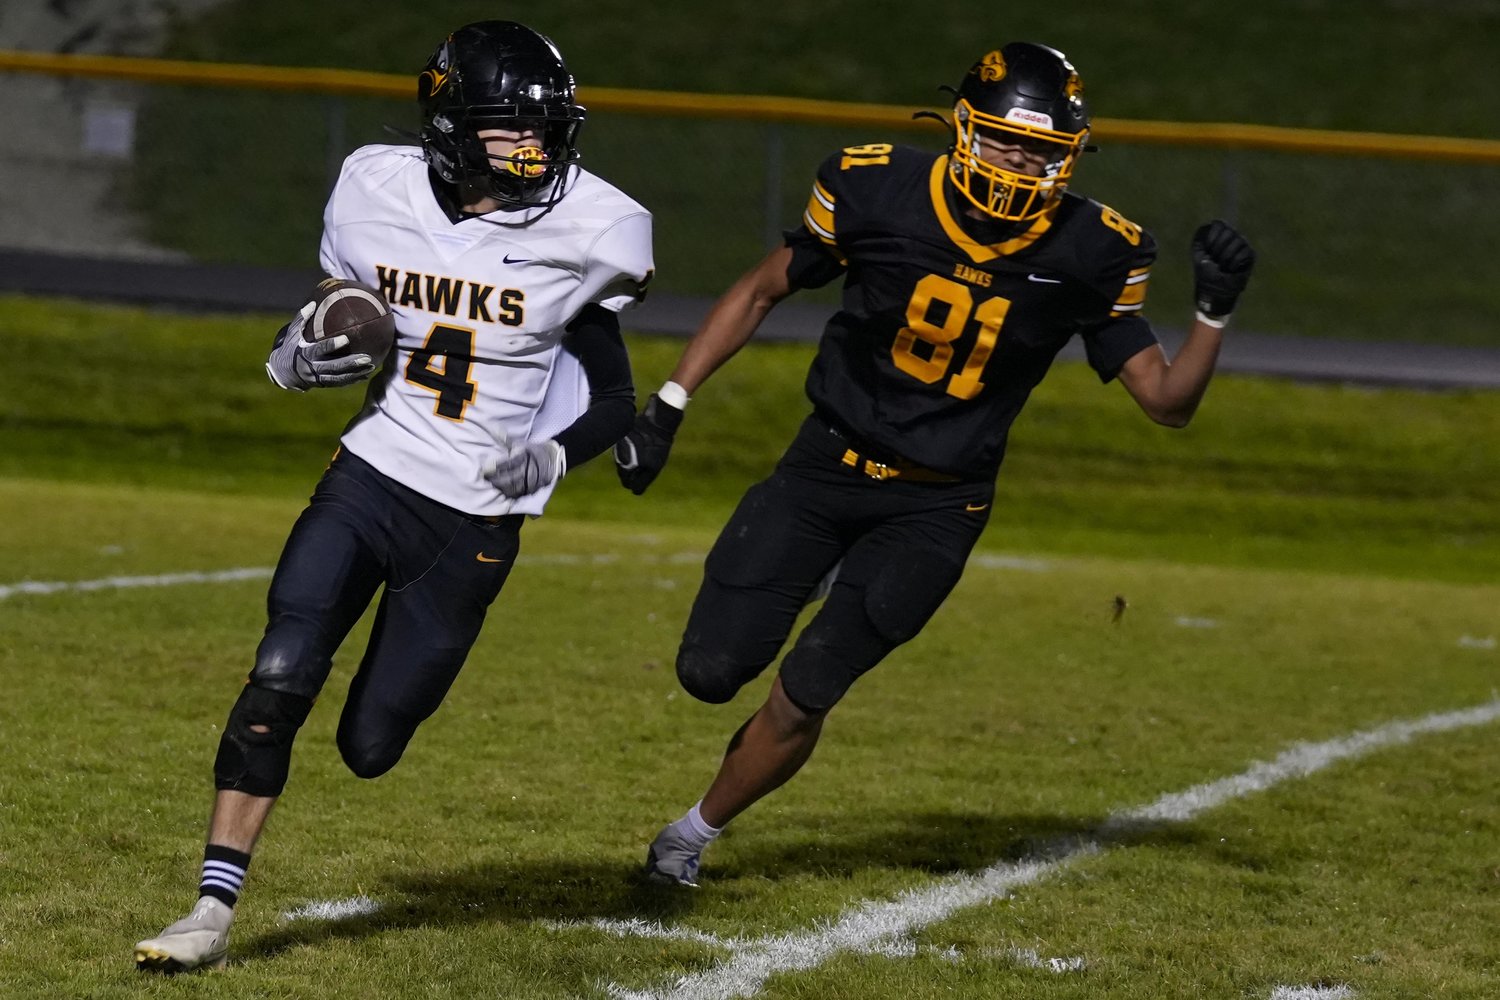 Central Lee High School's Grant Myhre (4) returns the kick during their game against Mid-Prairie High School, Friday, September 23, 2022 at Mid-Prairie.